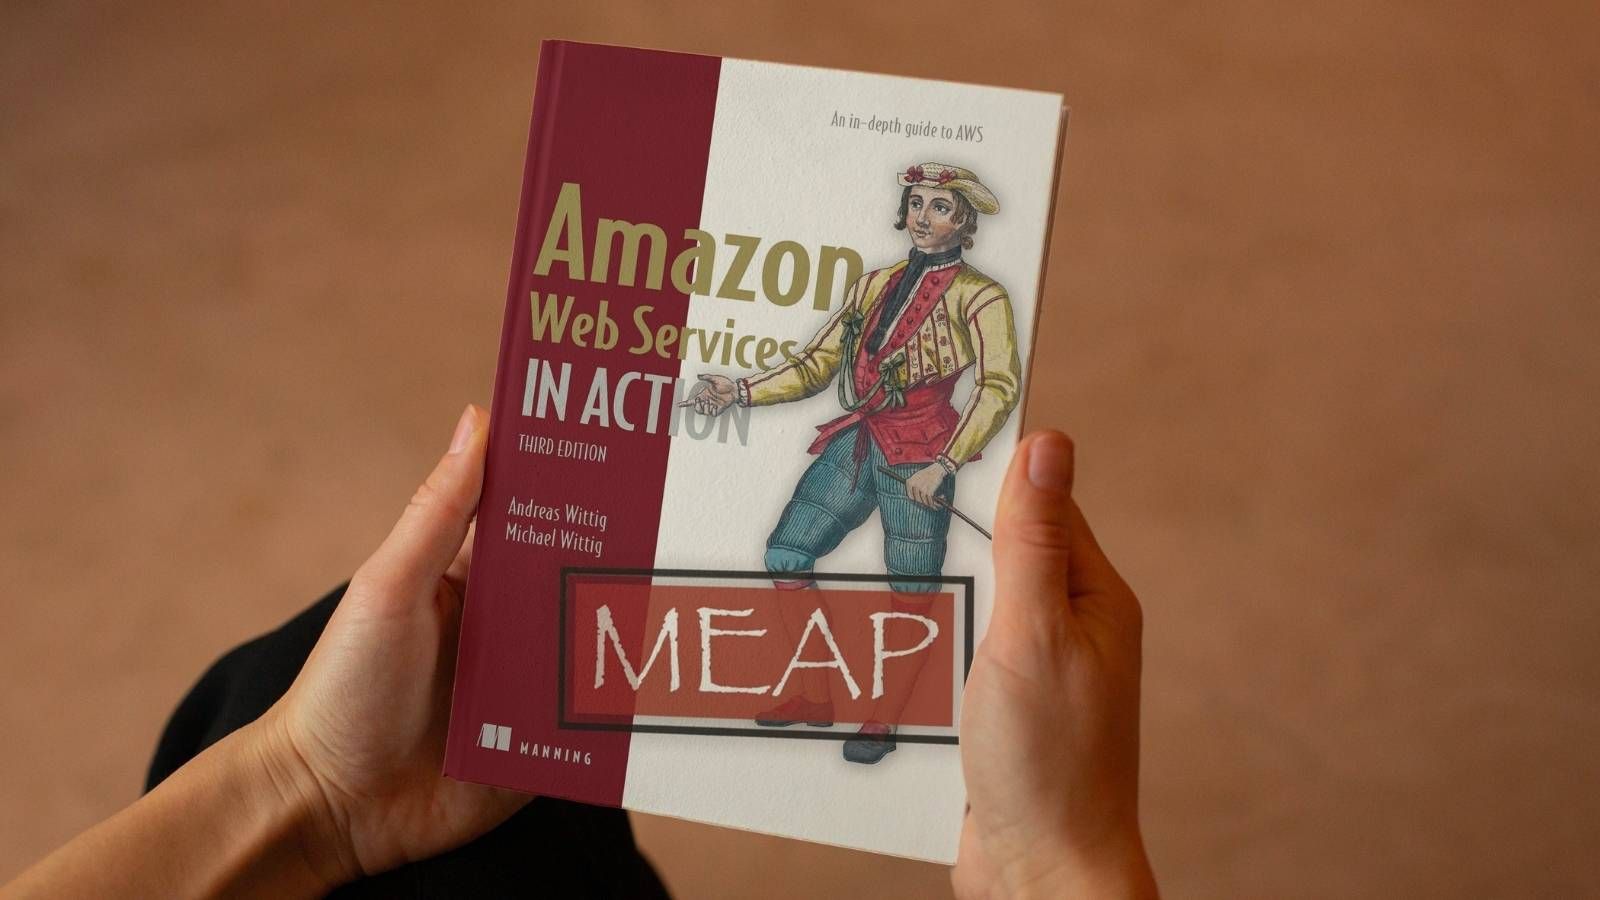 Amazon Web Services in Action, 3rd edition out now!